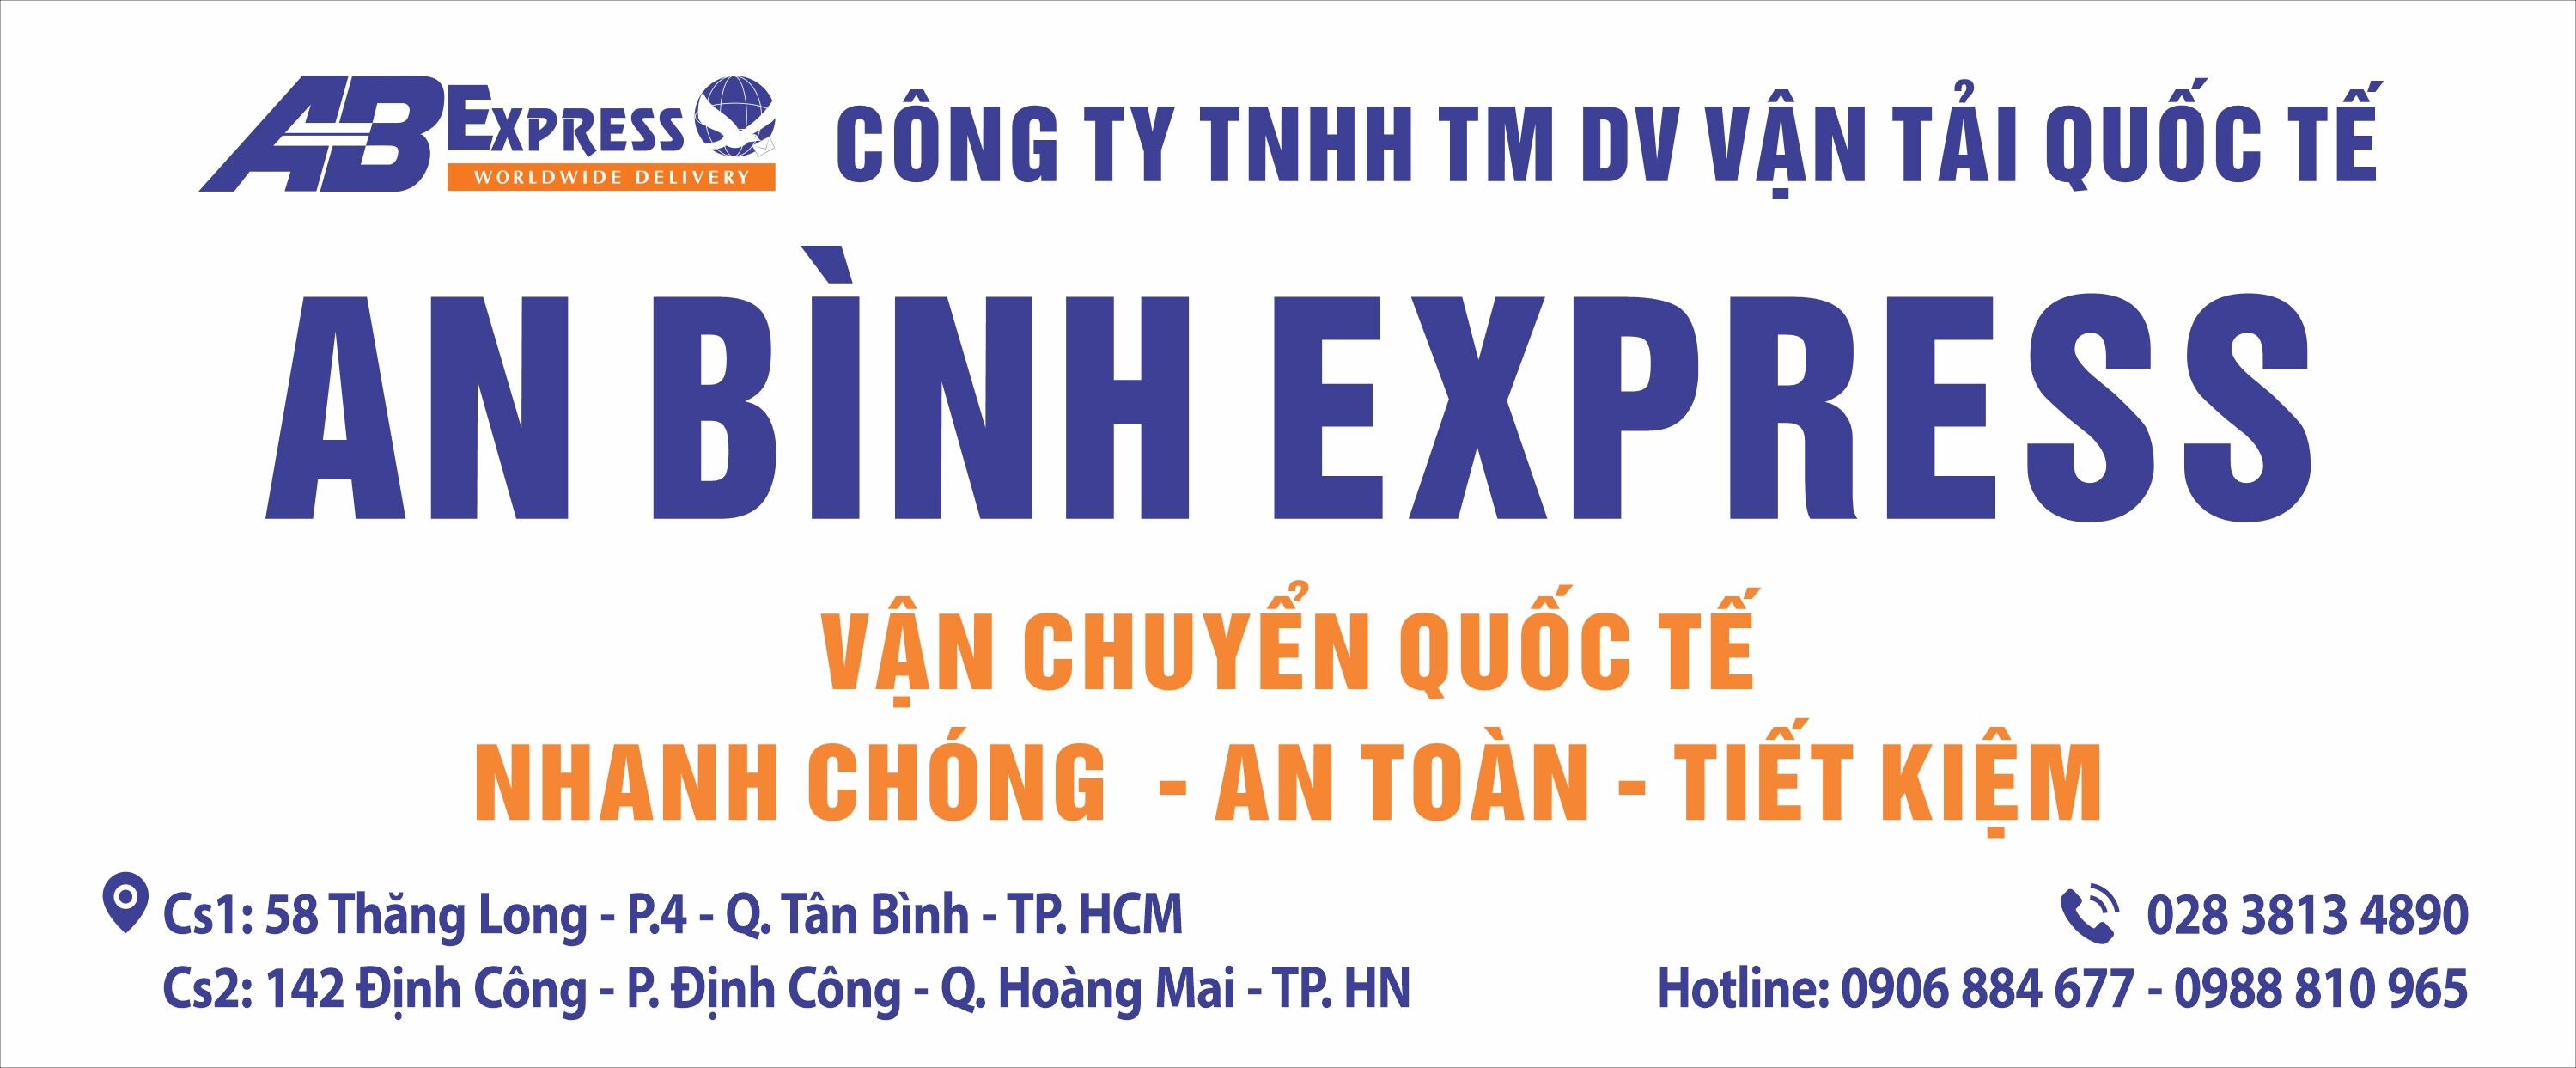 Cover image for An Bình Express